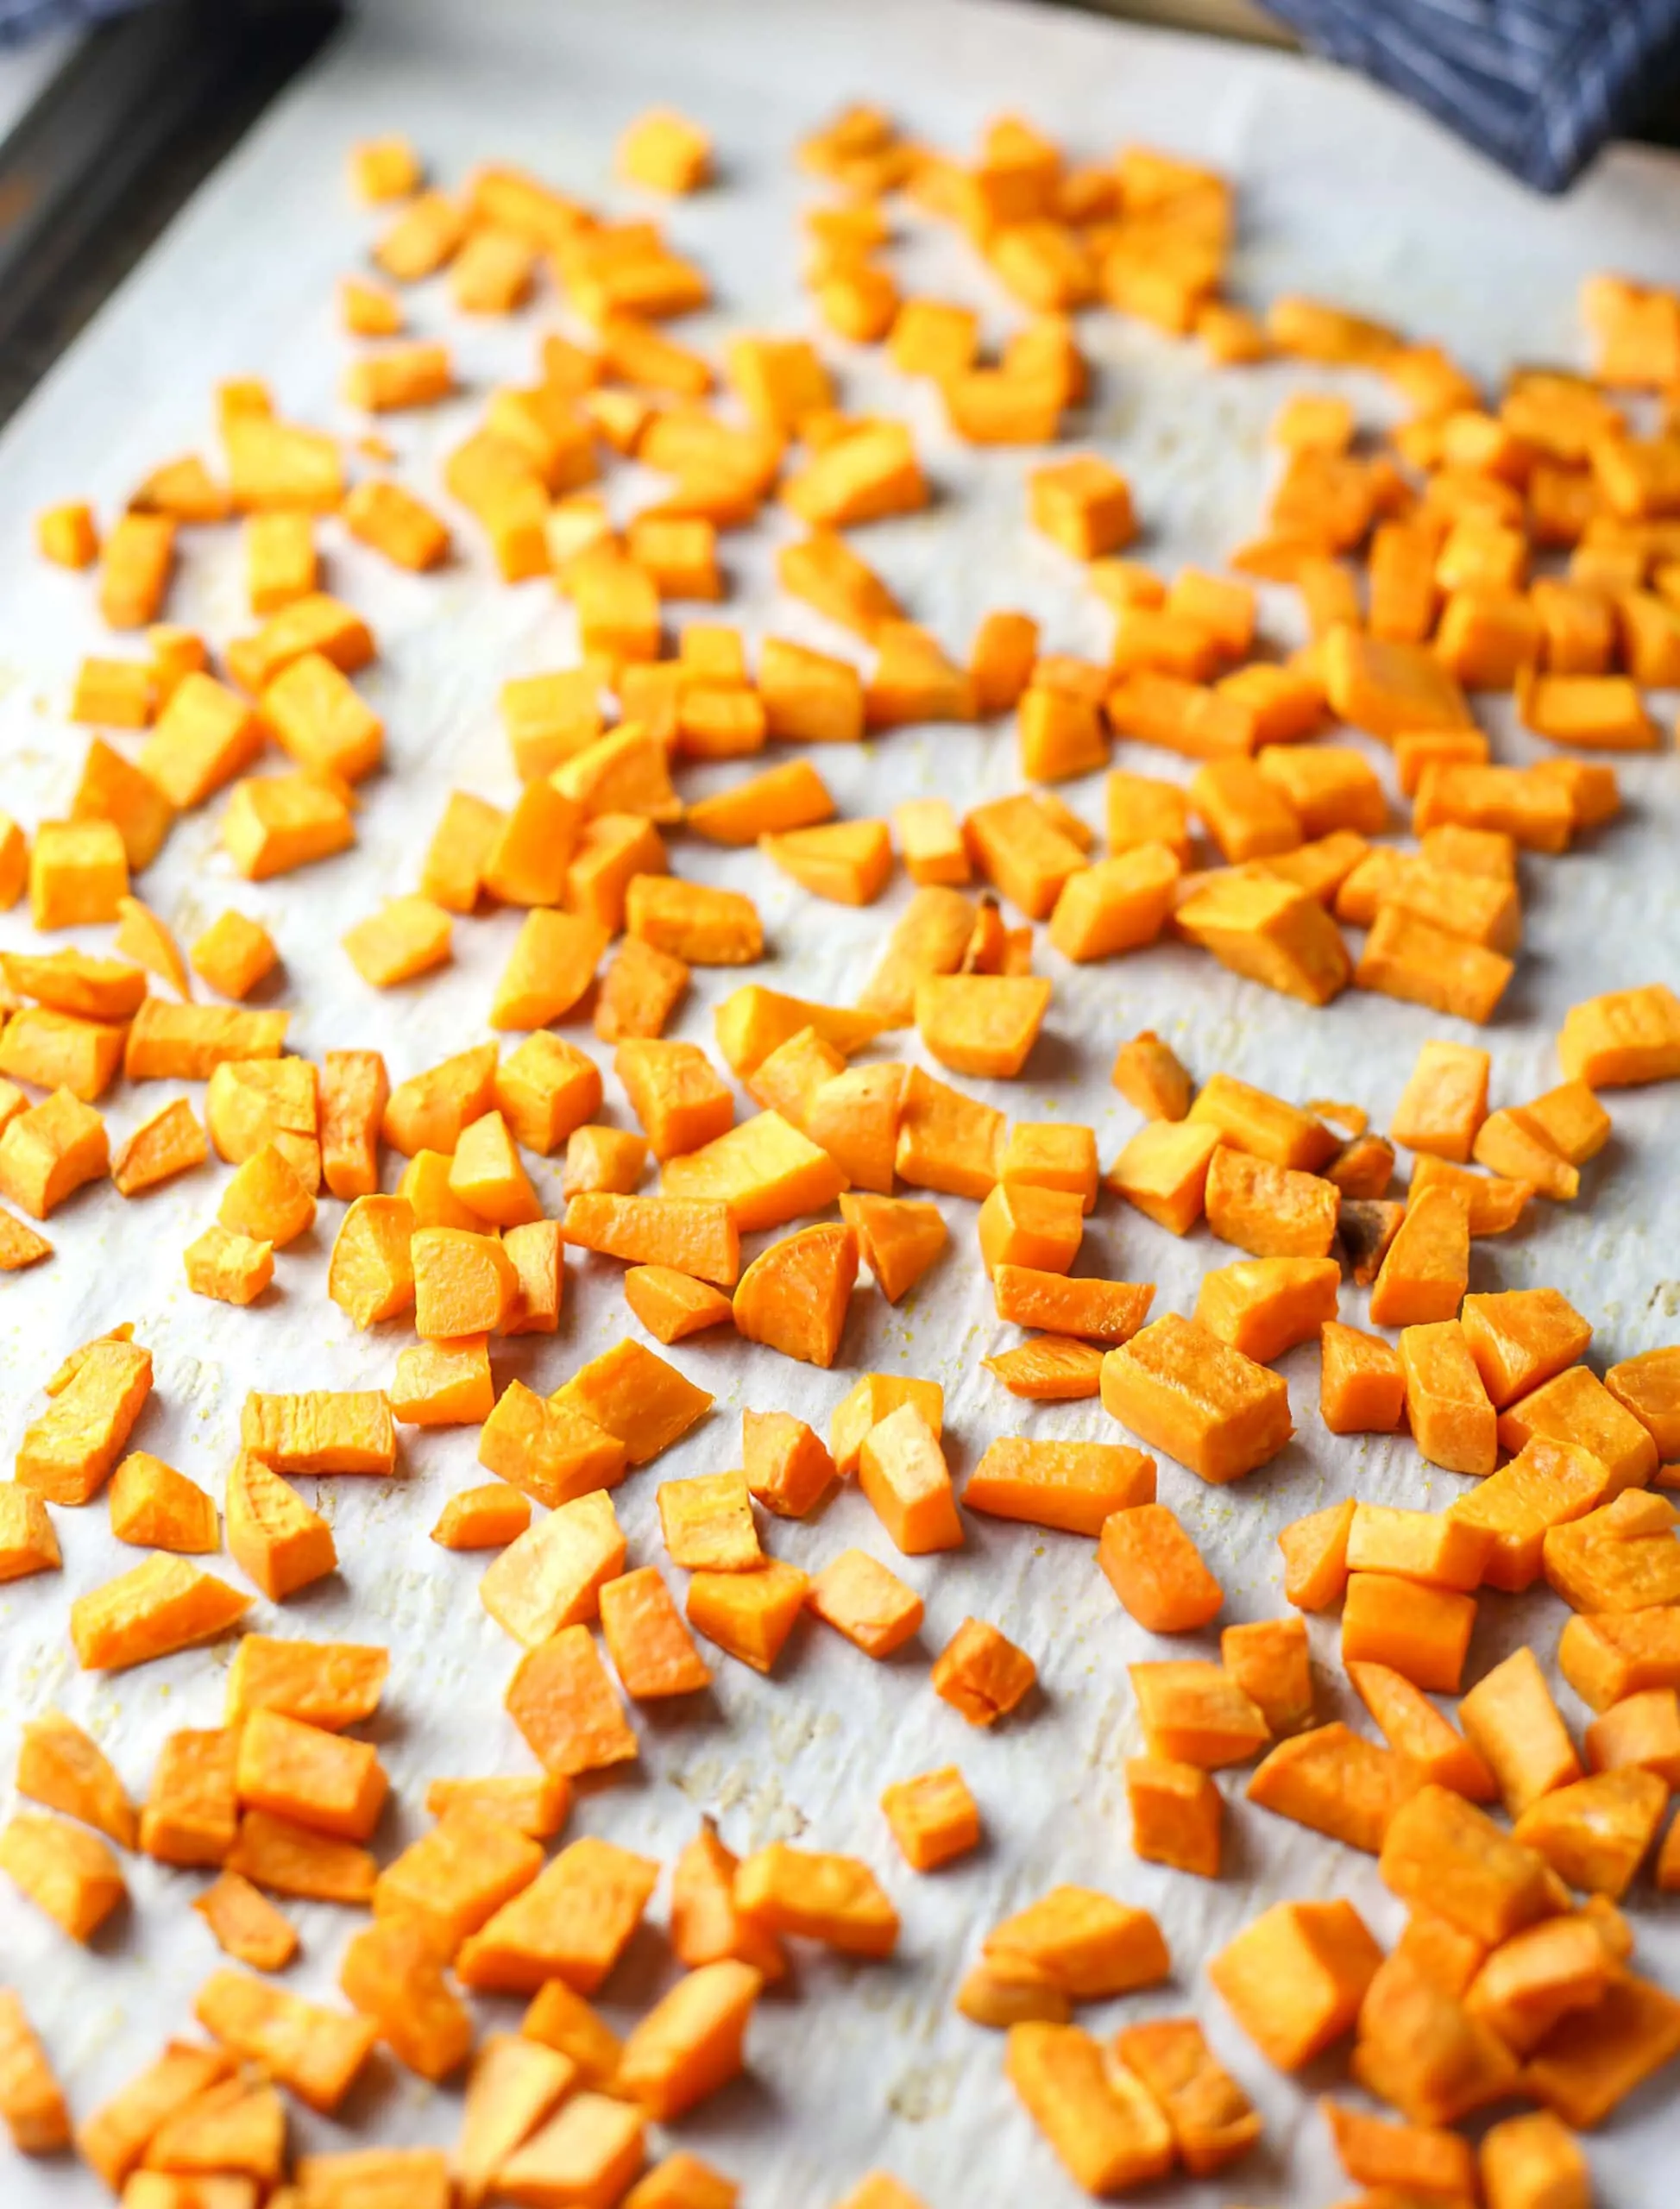 Chopped roasted butternut squash on a parchment paper lined baking sheet.